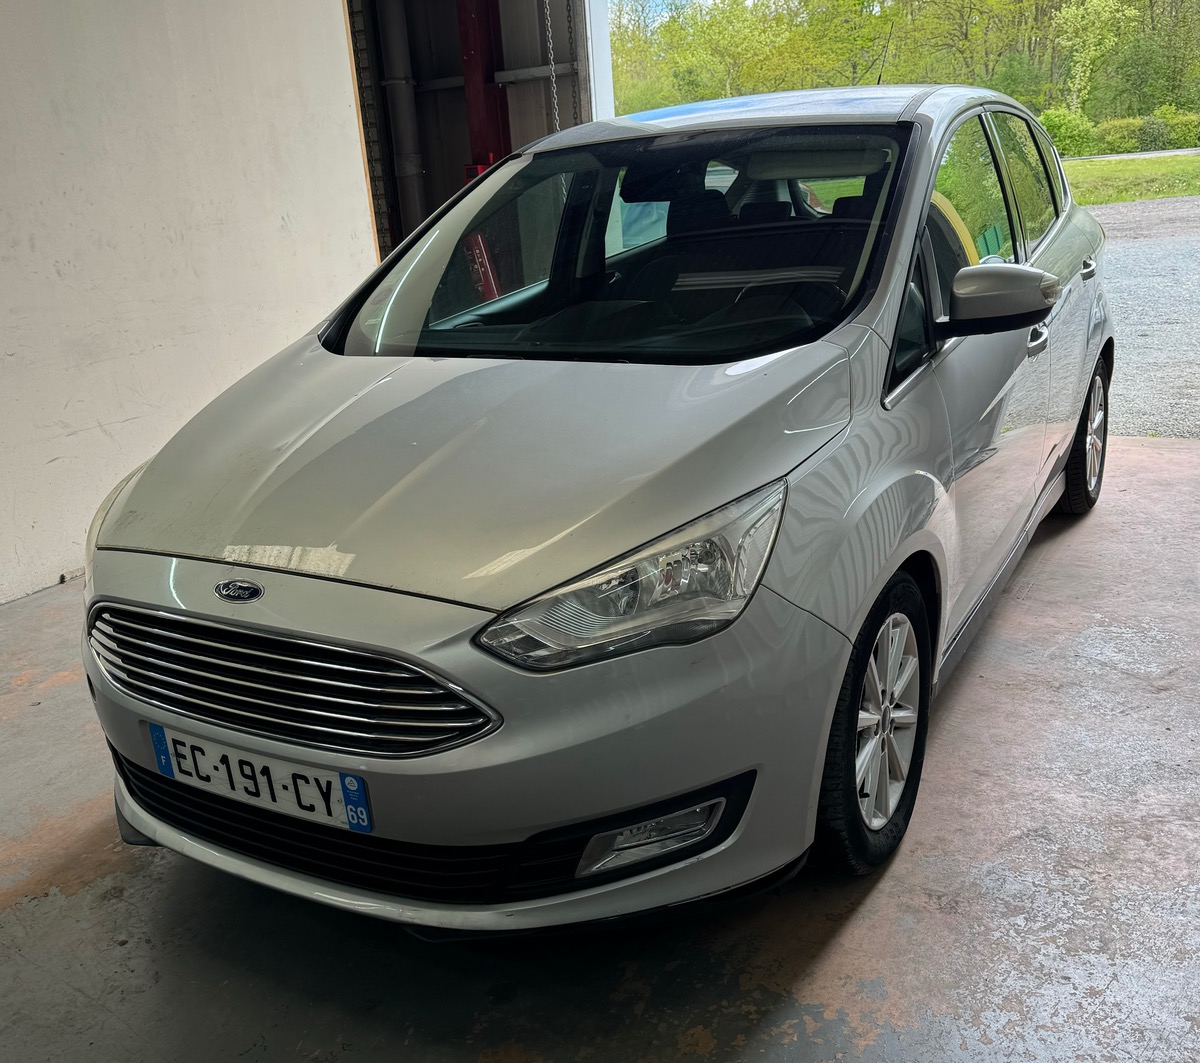 Ford C-max 1.0 scti 125 - 146000kms